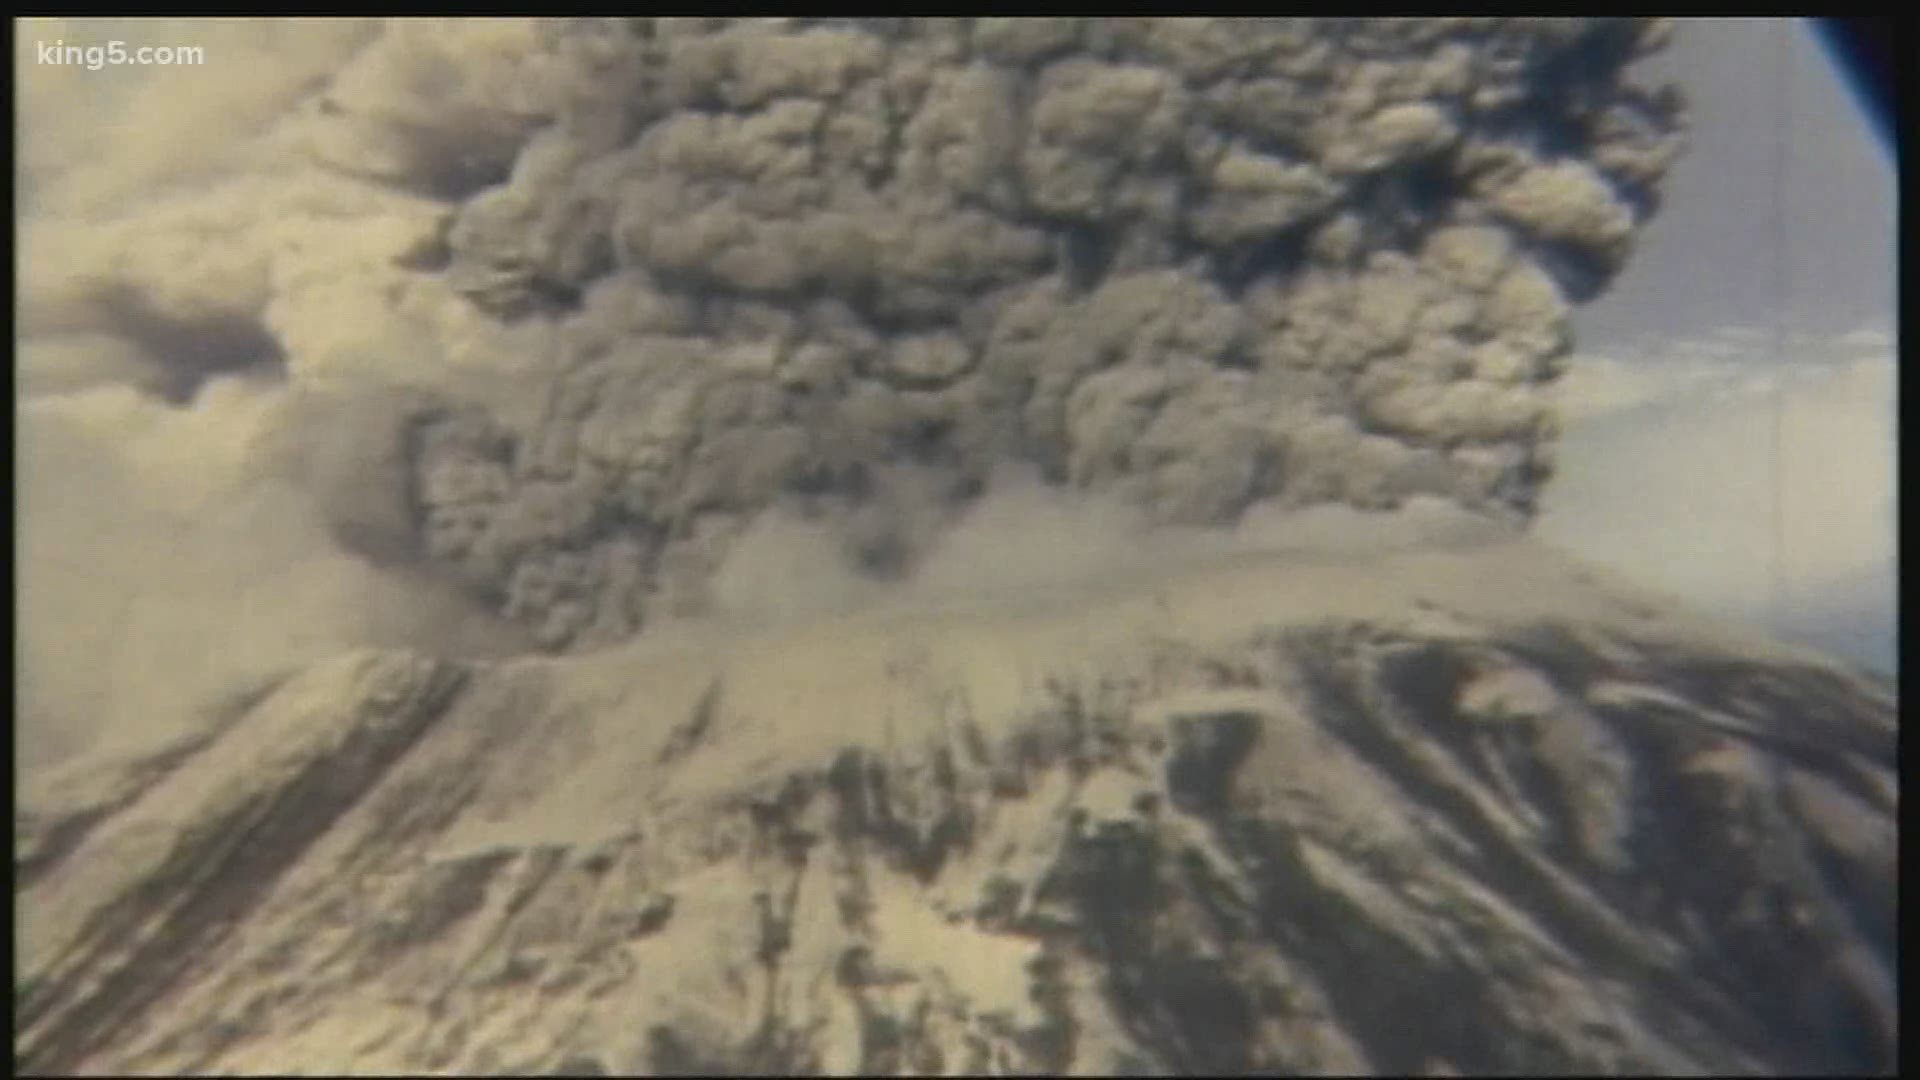 On the 40th anniversary of the 1980 Mount St. Helens eruption, KING 5 Mornings looks back at the deadly blast and the aftermath.